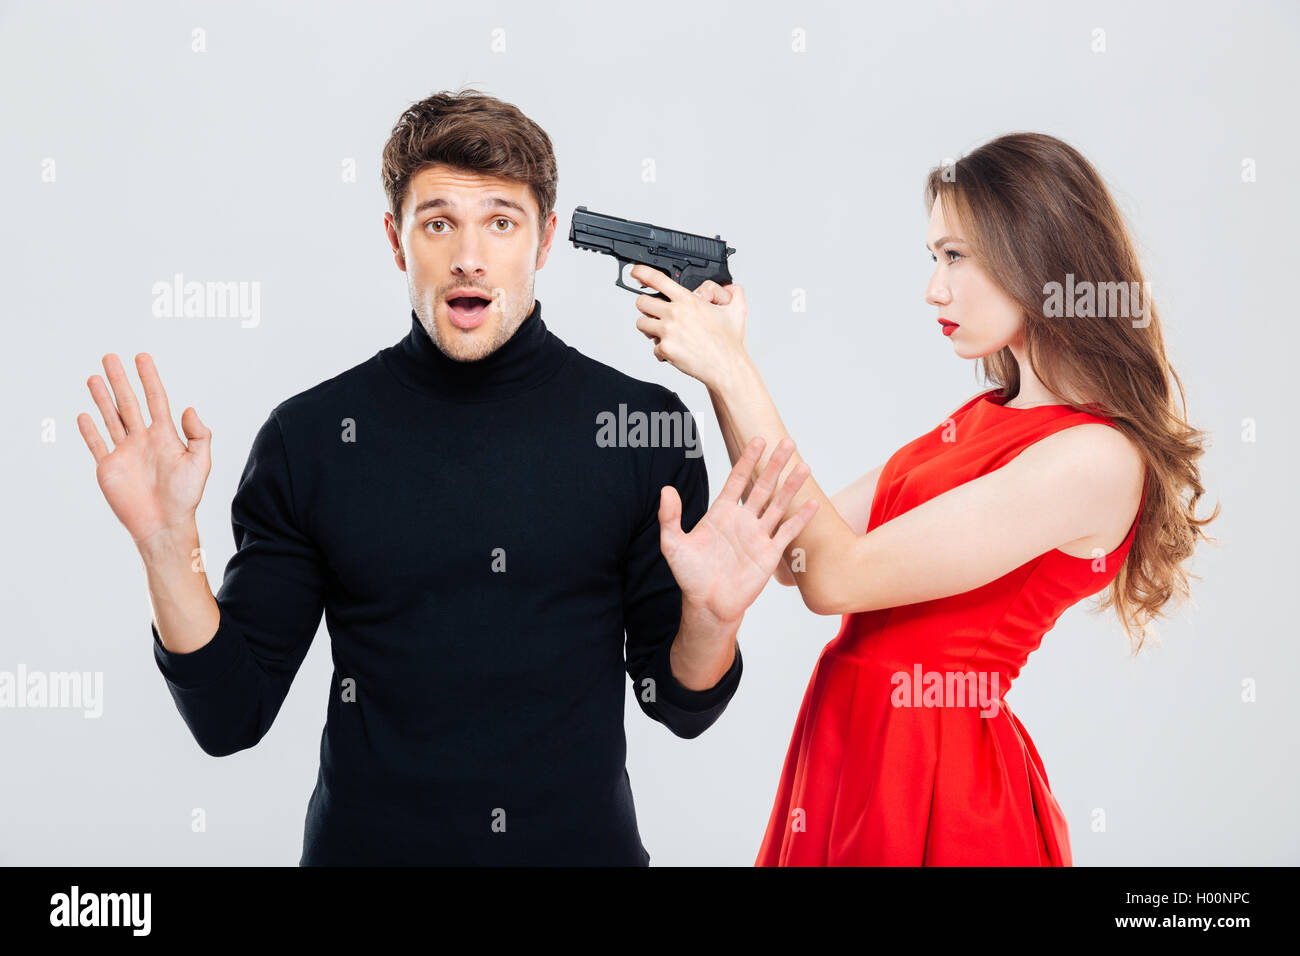 Beautiful young woman standing and threatening with gun to scared young man Stock Photo